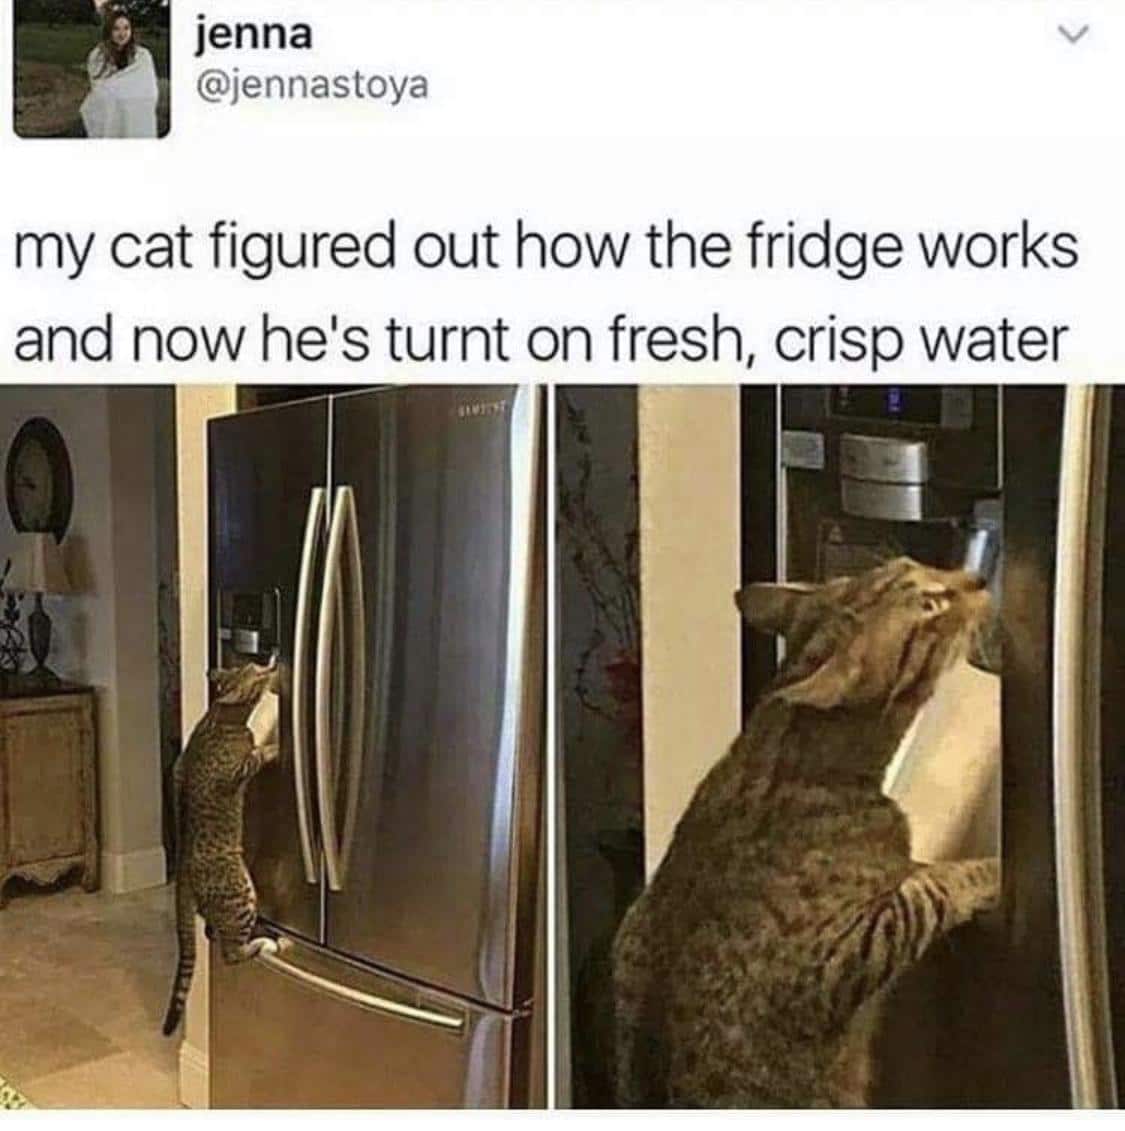 Water, Nice, NE OF US Water Memes Water, Nice, NE OF US text: jenna @jennastoya my cat figured out how the fridge works and now he's turnt on fresh, crisp water 